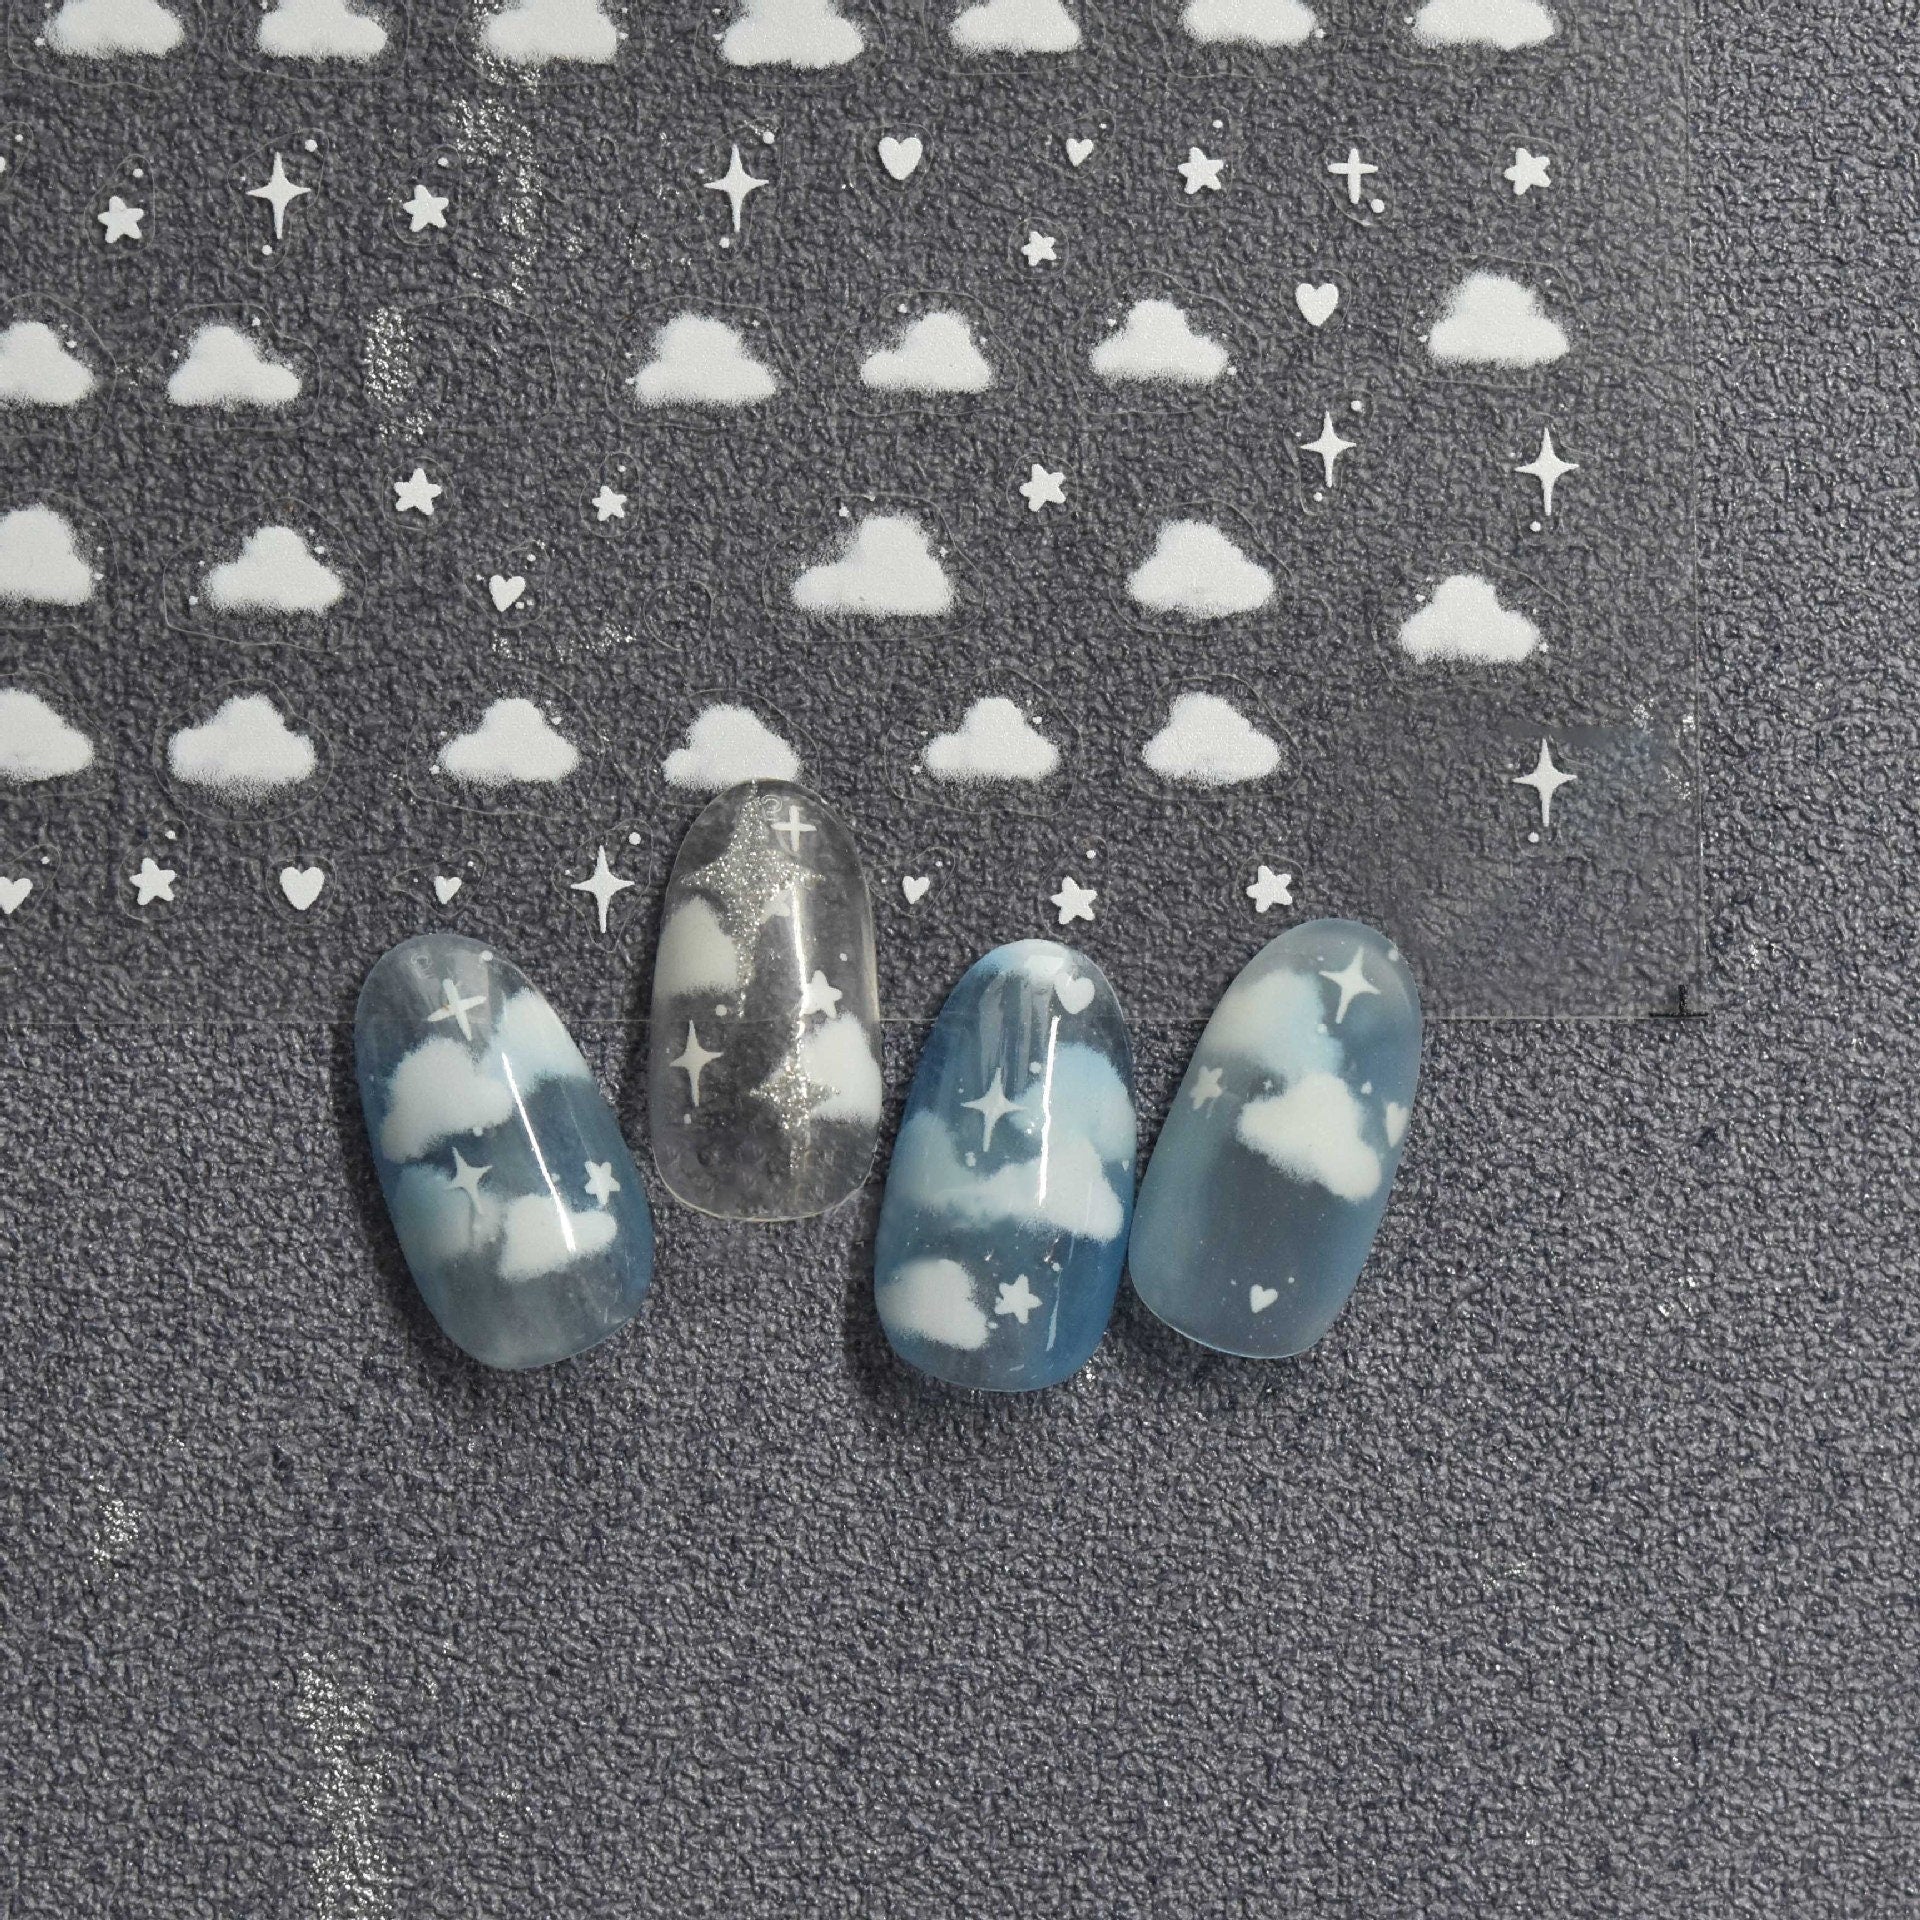 White Cloud Nail stickers/Ultra thin Nail Art Stickers Self Adhesive Decals/ White Clouds Nails Decals